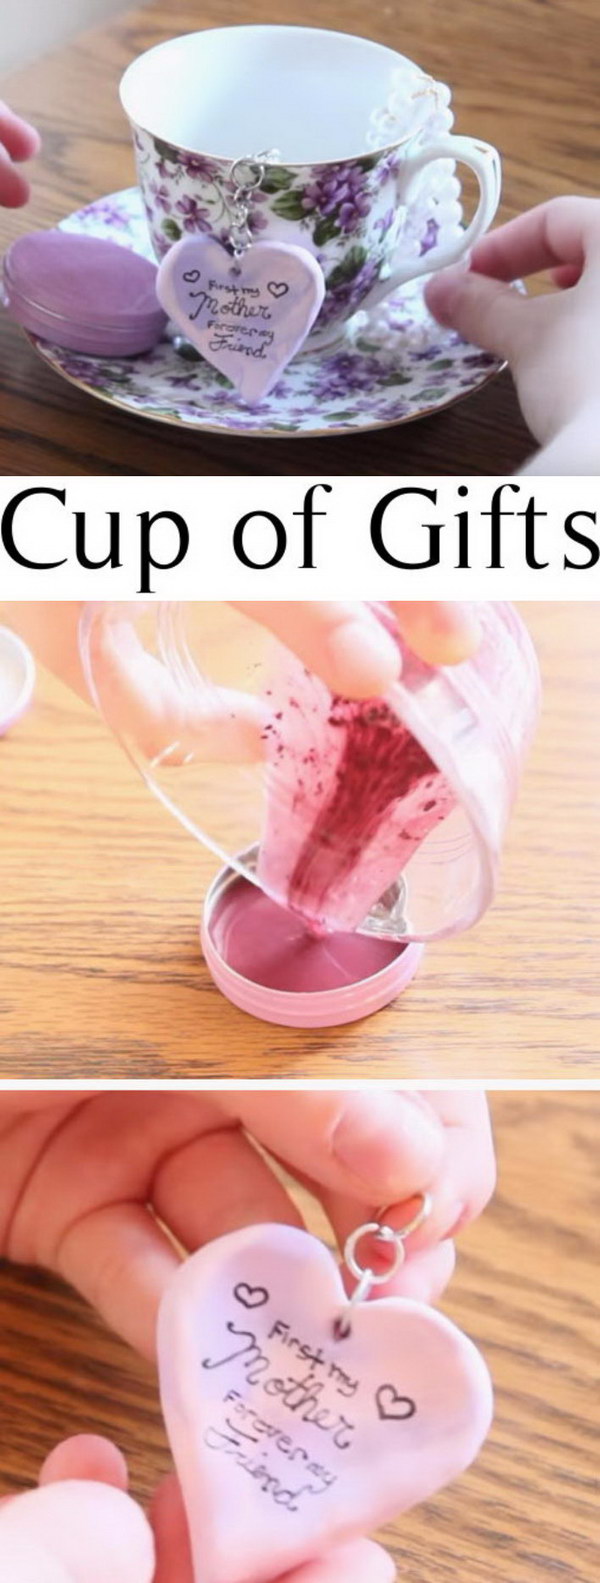 Cup of Gifts. 